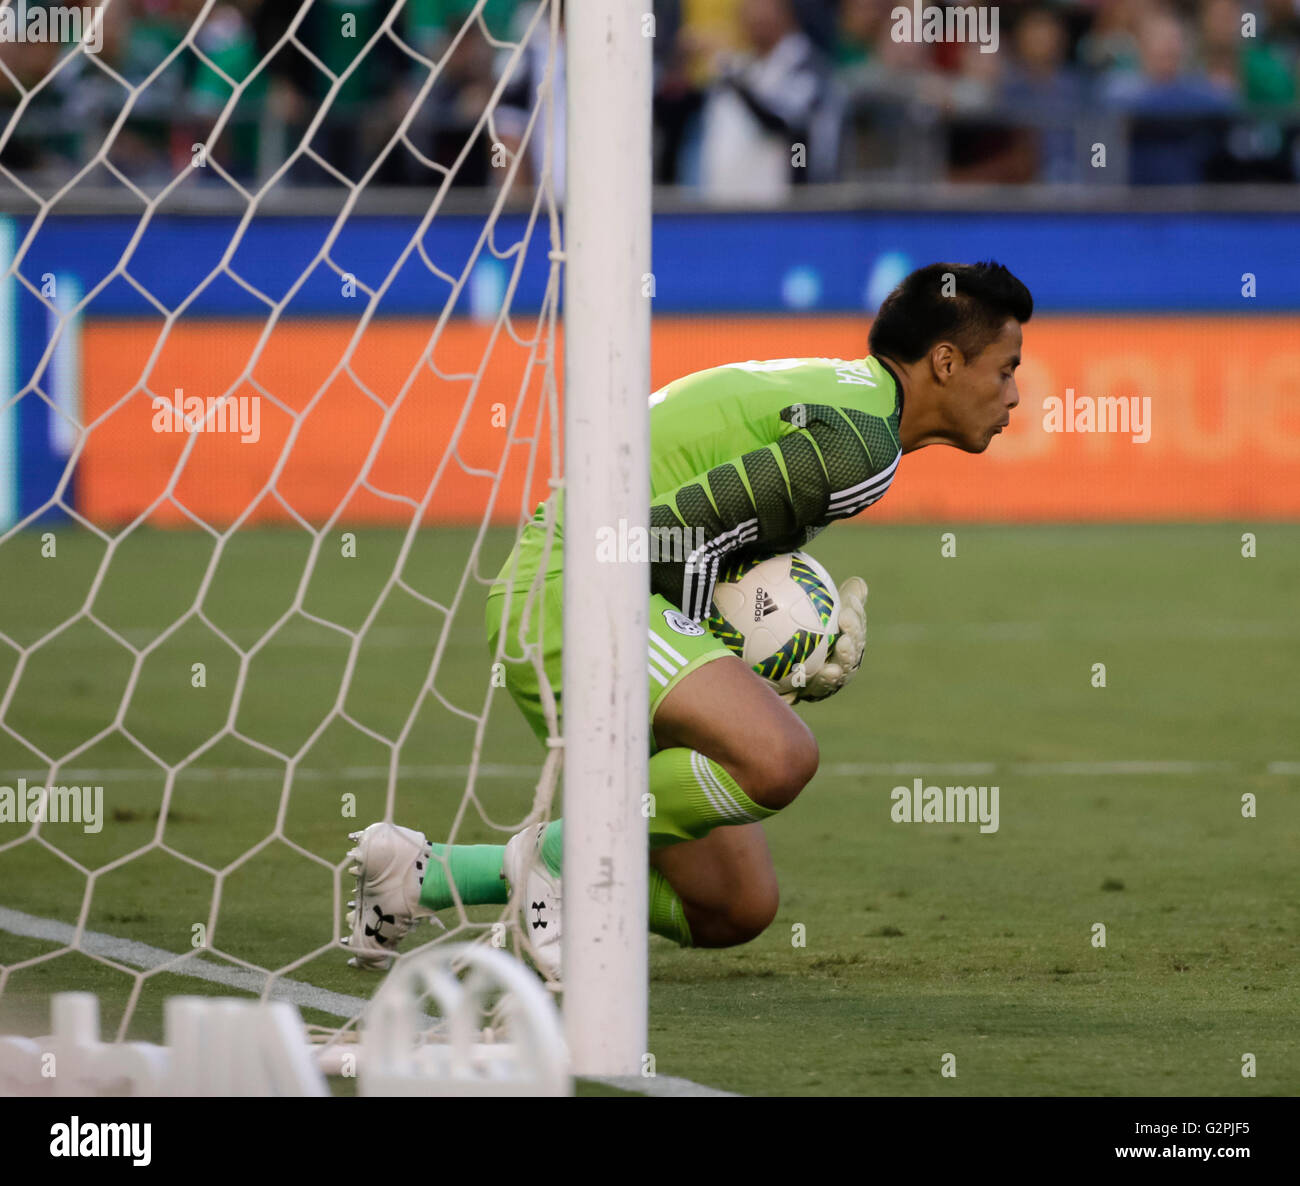 San Diego, California, USA. 01st June, 2016. Mexican Goalkeeper #12 Alfredo Talavera stops a shot with his body during an international soccer match between Mexico and Chile at Qualcomm Stadium in San Diego, California. Justin Cooper/CSM/Alamy Live News Stock Photo